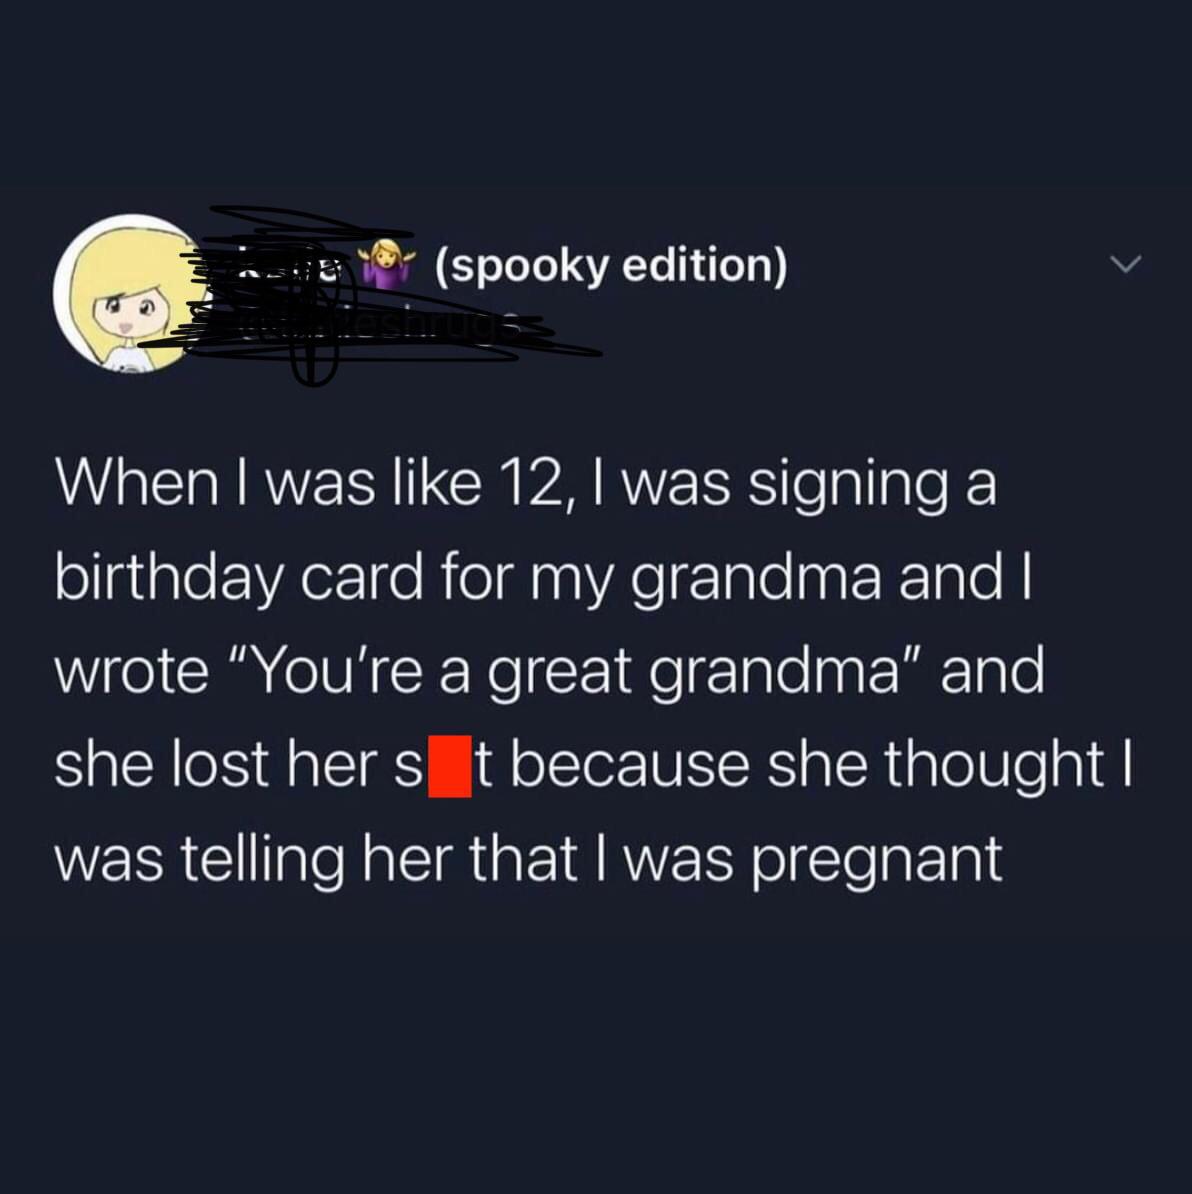 reddit facepalm - atmosphere - spooky edition When I was 12, I was signing a birthday card for my grandma and I wrote "You're a great grandma and she lost her s t because she thought I was telling her that I was pregnant